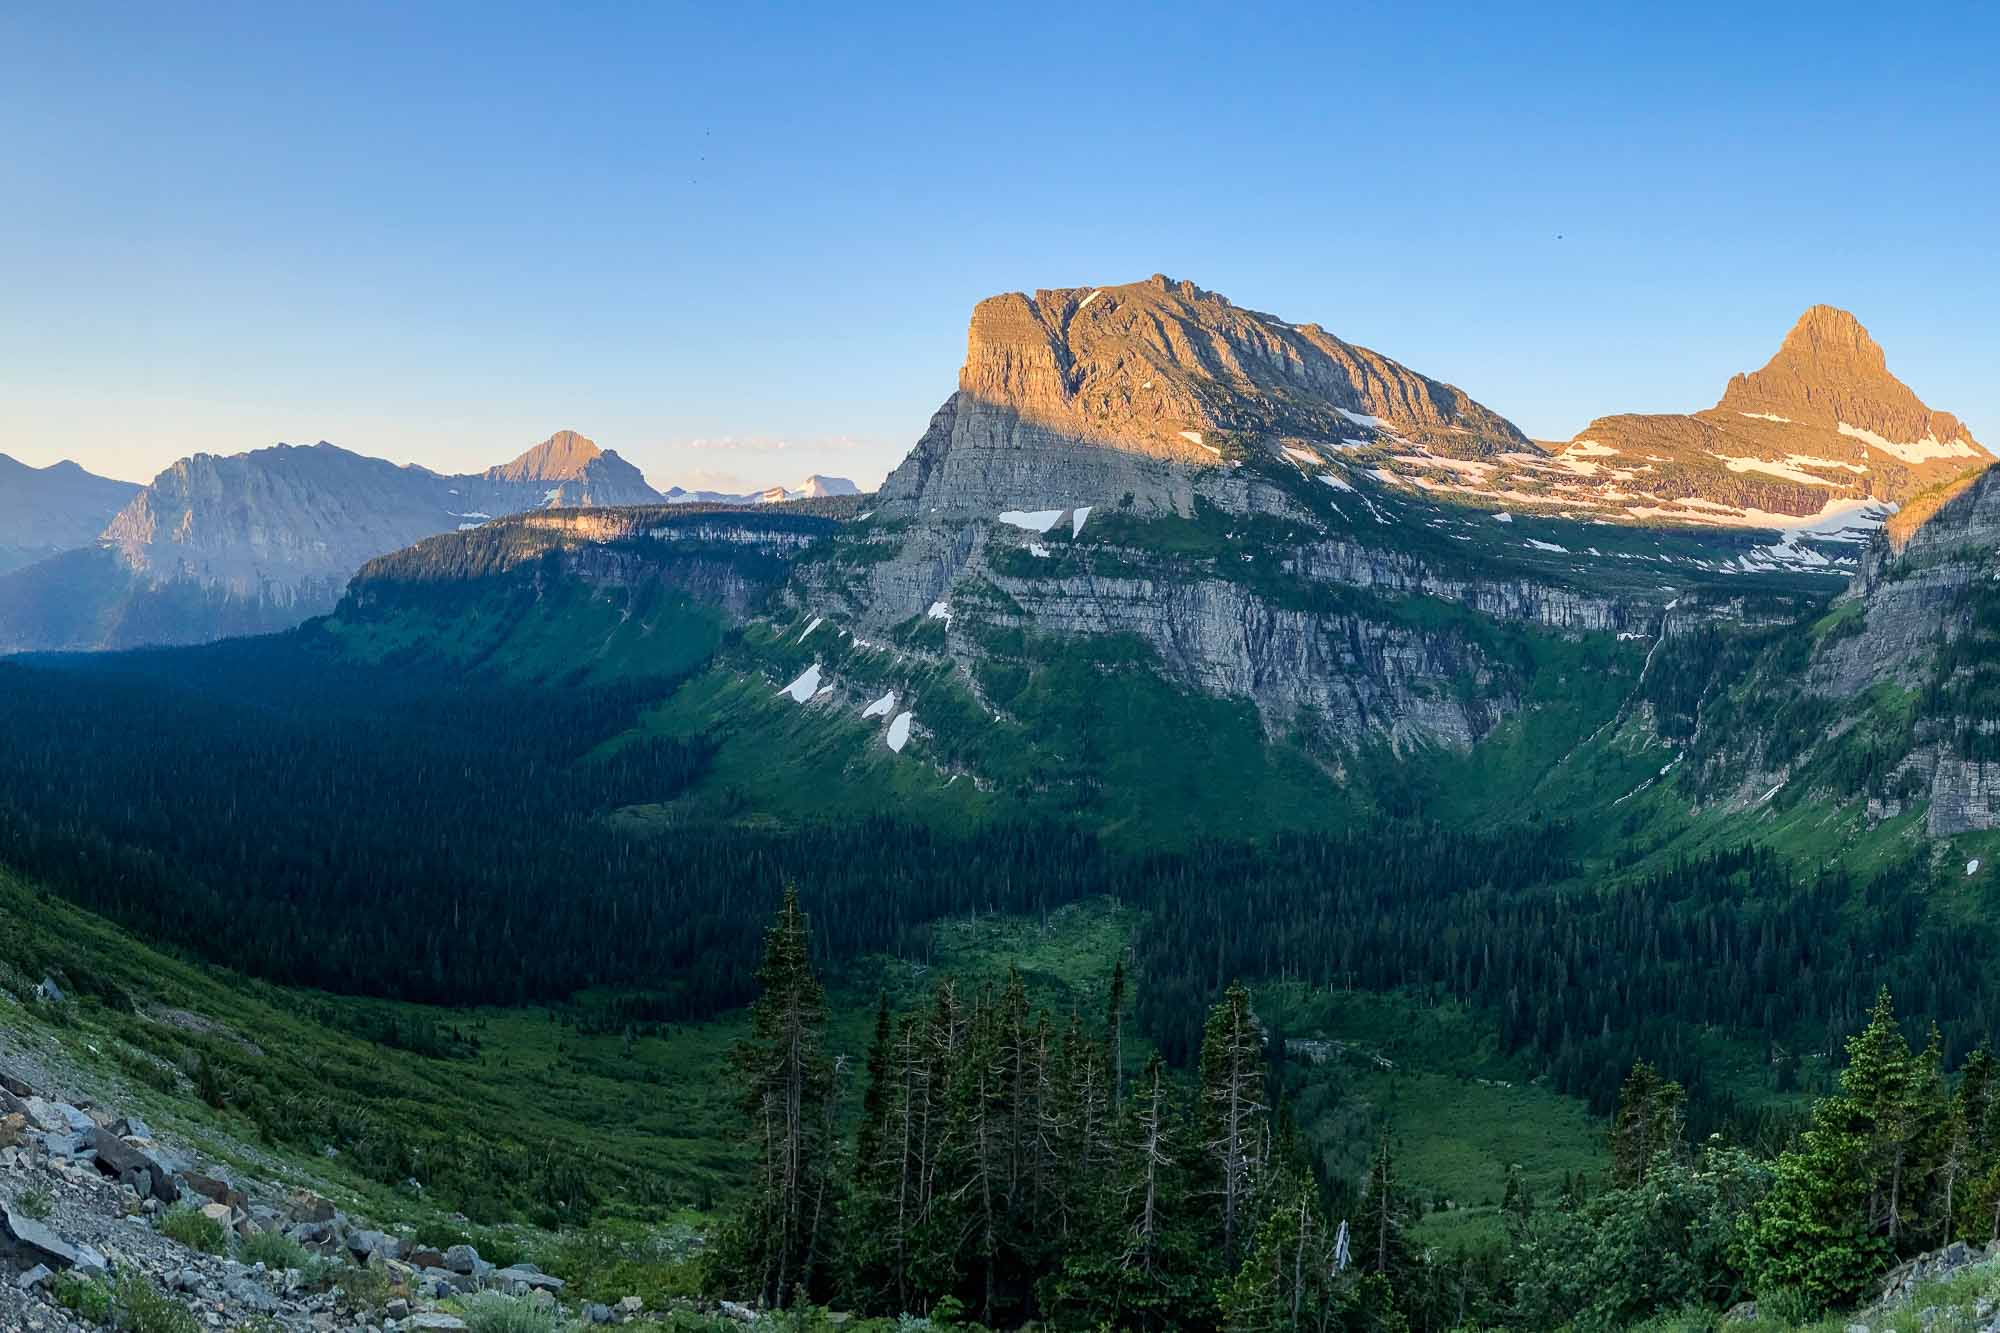 Going-to-the-Sun Road viewpoint in Glacier National Park, Montana, UNESCO World Heritage Site